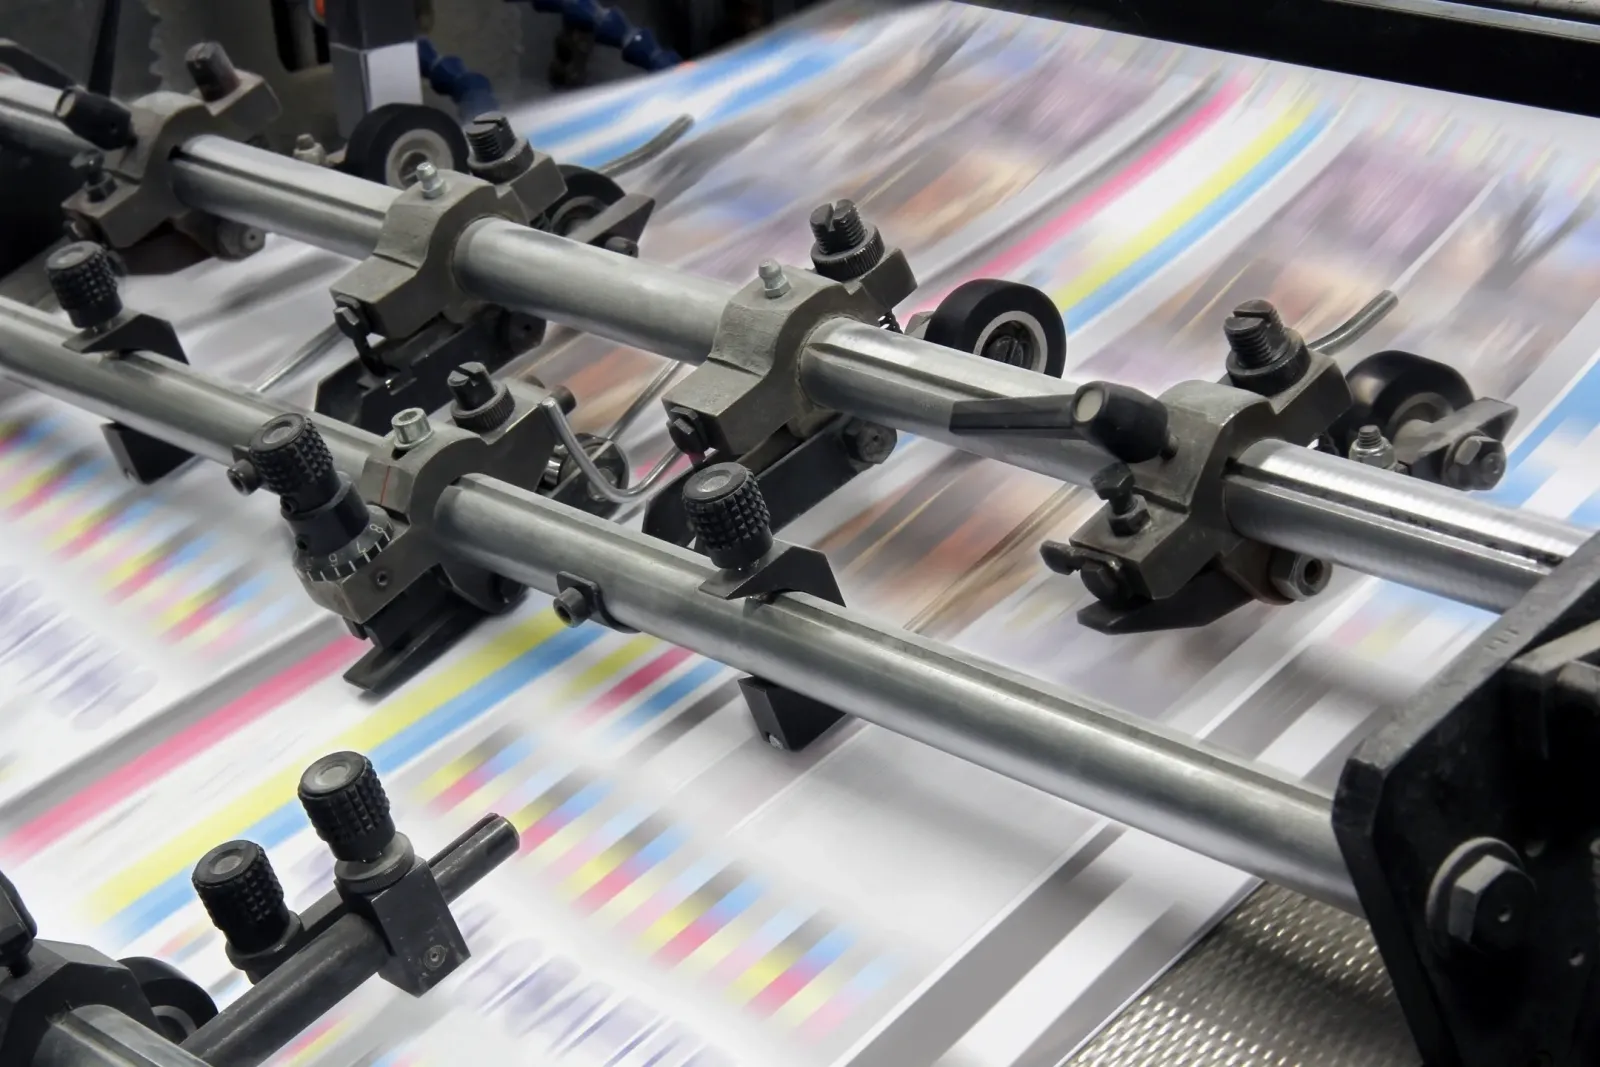 A large sheet of paper being printed on an offset printing press